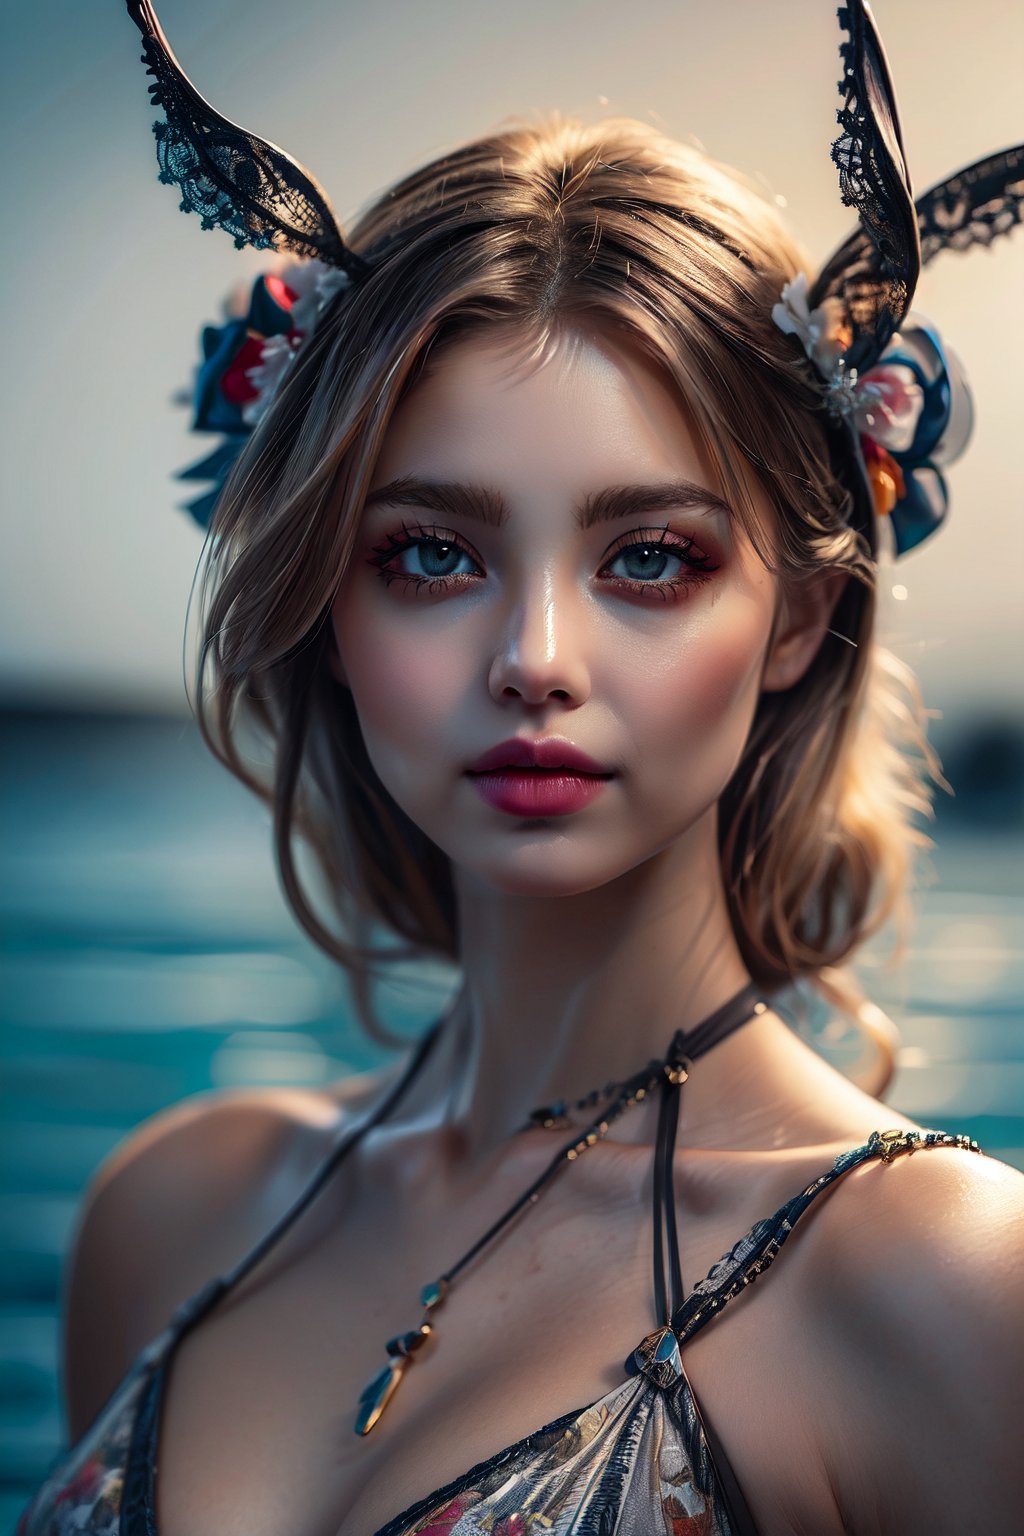 (masterpiece, high quality:1.5), 8K, HDR, 
1girl, well_defined_face, well_defined_eyes, ultra_detailed_eyes, ultra_detailed_face, by FuturEvoLab, 
ethereal lighting, immortal, elegant, porcelain skin, jet-black hair, waves, pale face, ice-blue eyes, blood-red lips, pinhole photograph, retro aesthetic, monochromatic backdrop, mysterious, enigmatic, timeless allure, the siren of the night, secrets, longing, hidden dangers, captivating, nostalgia, timeless fascination, 